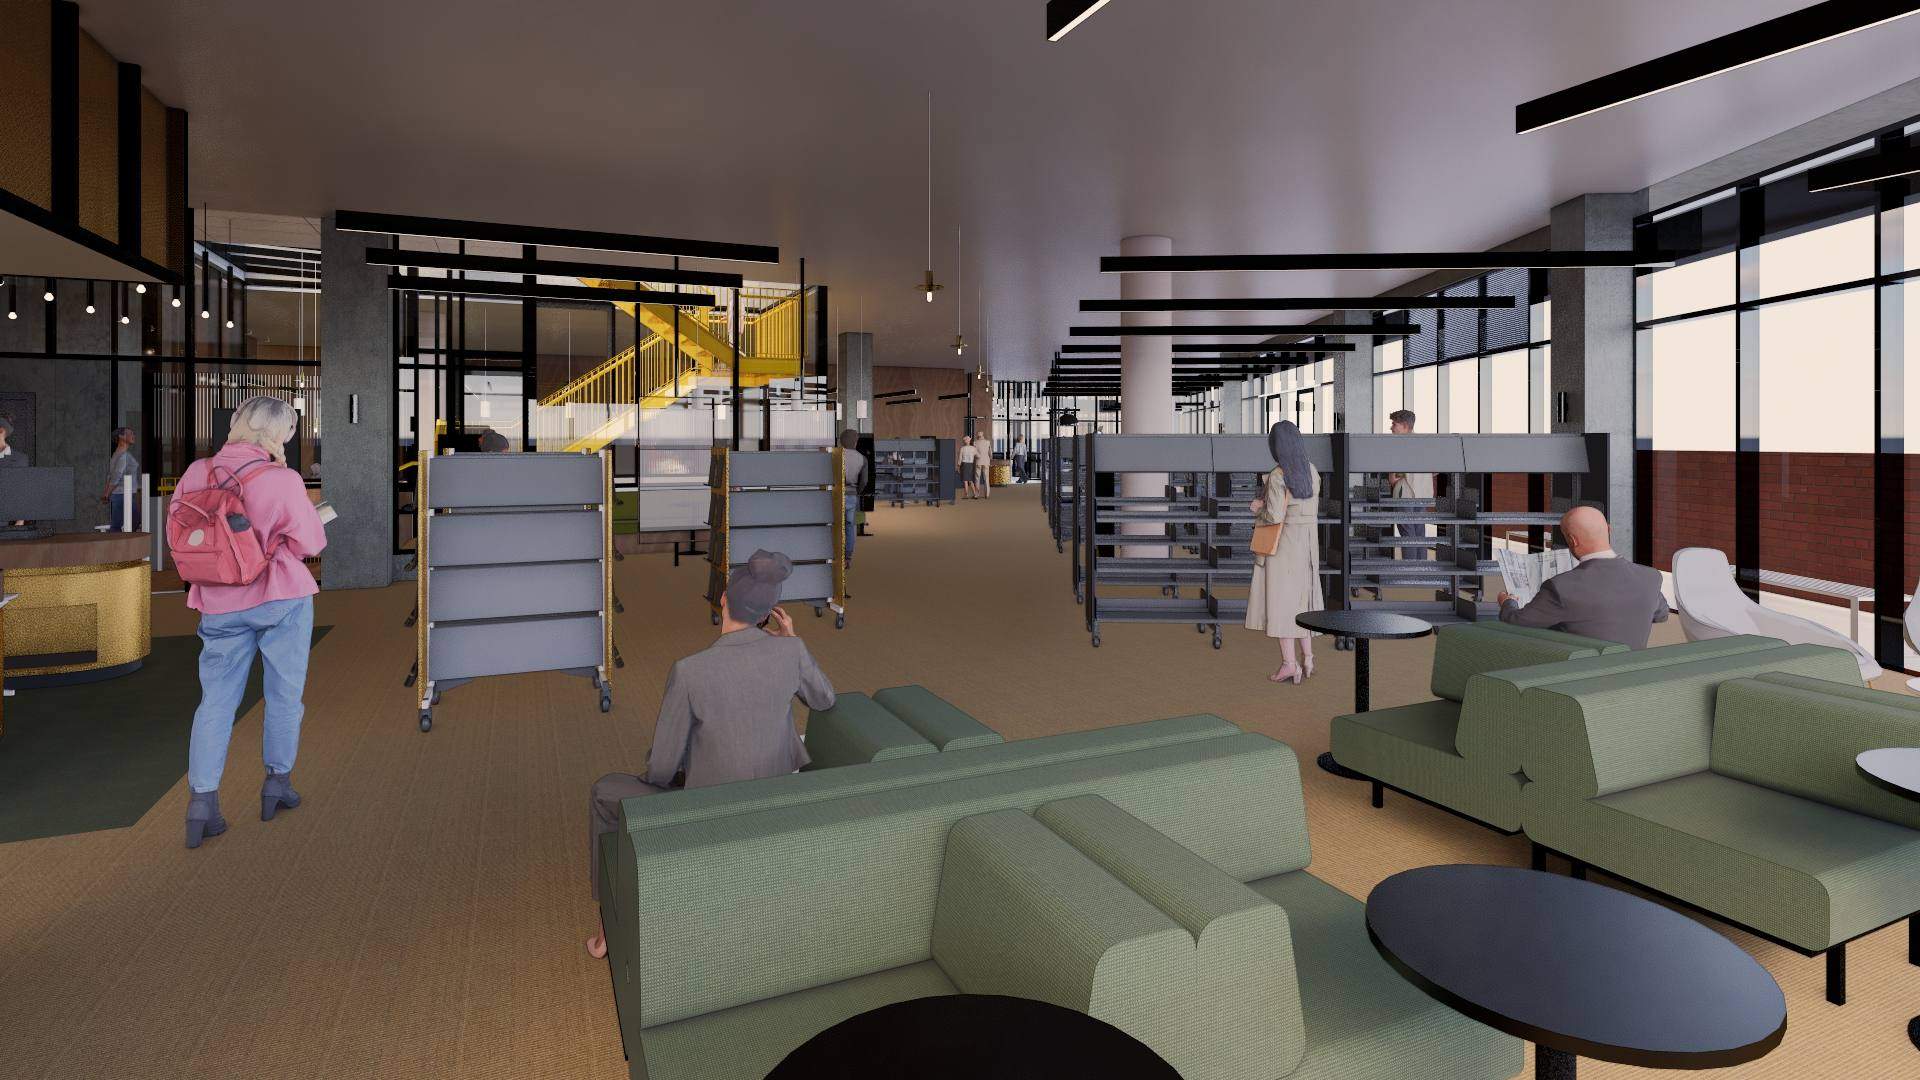 Here Are the Latest Plans for the QVM's Groundbreaking Rooftop Library and Community Hub